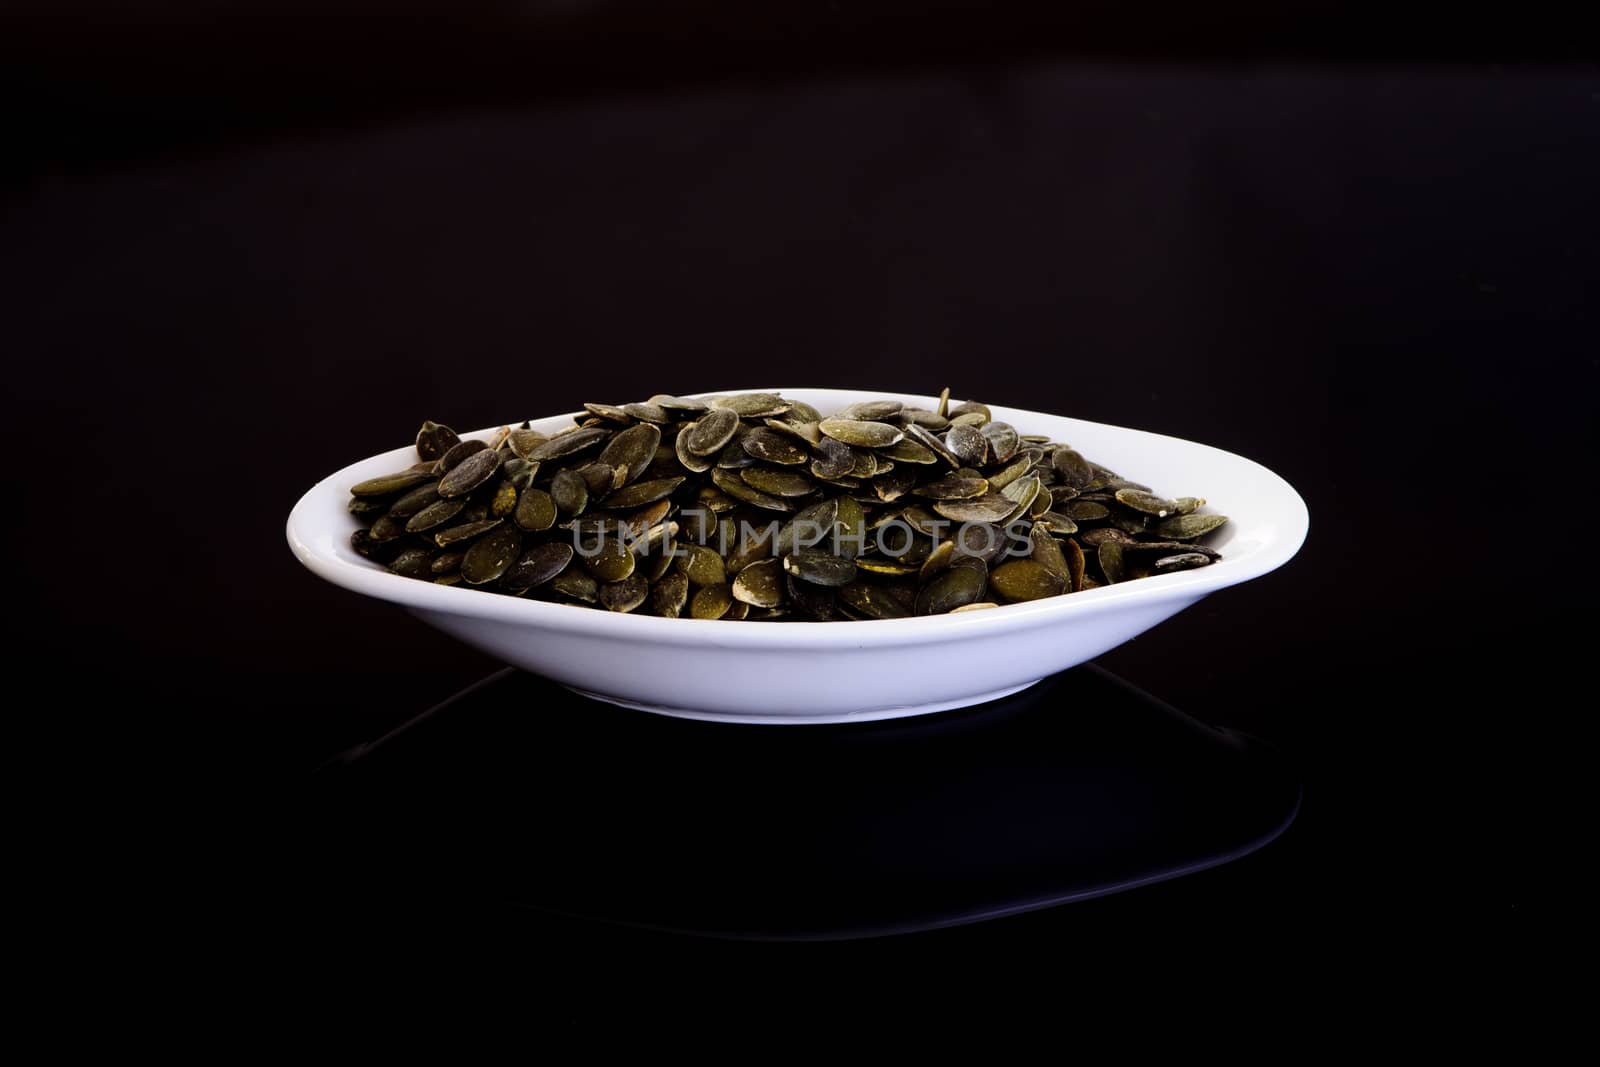 Pumpkin Seeds in a white plate on a black background